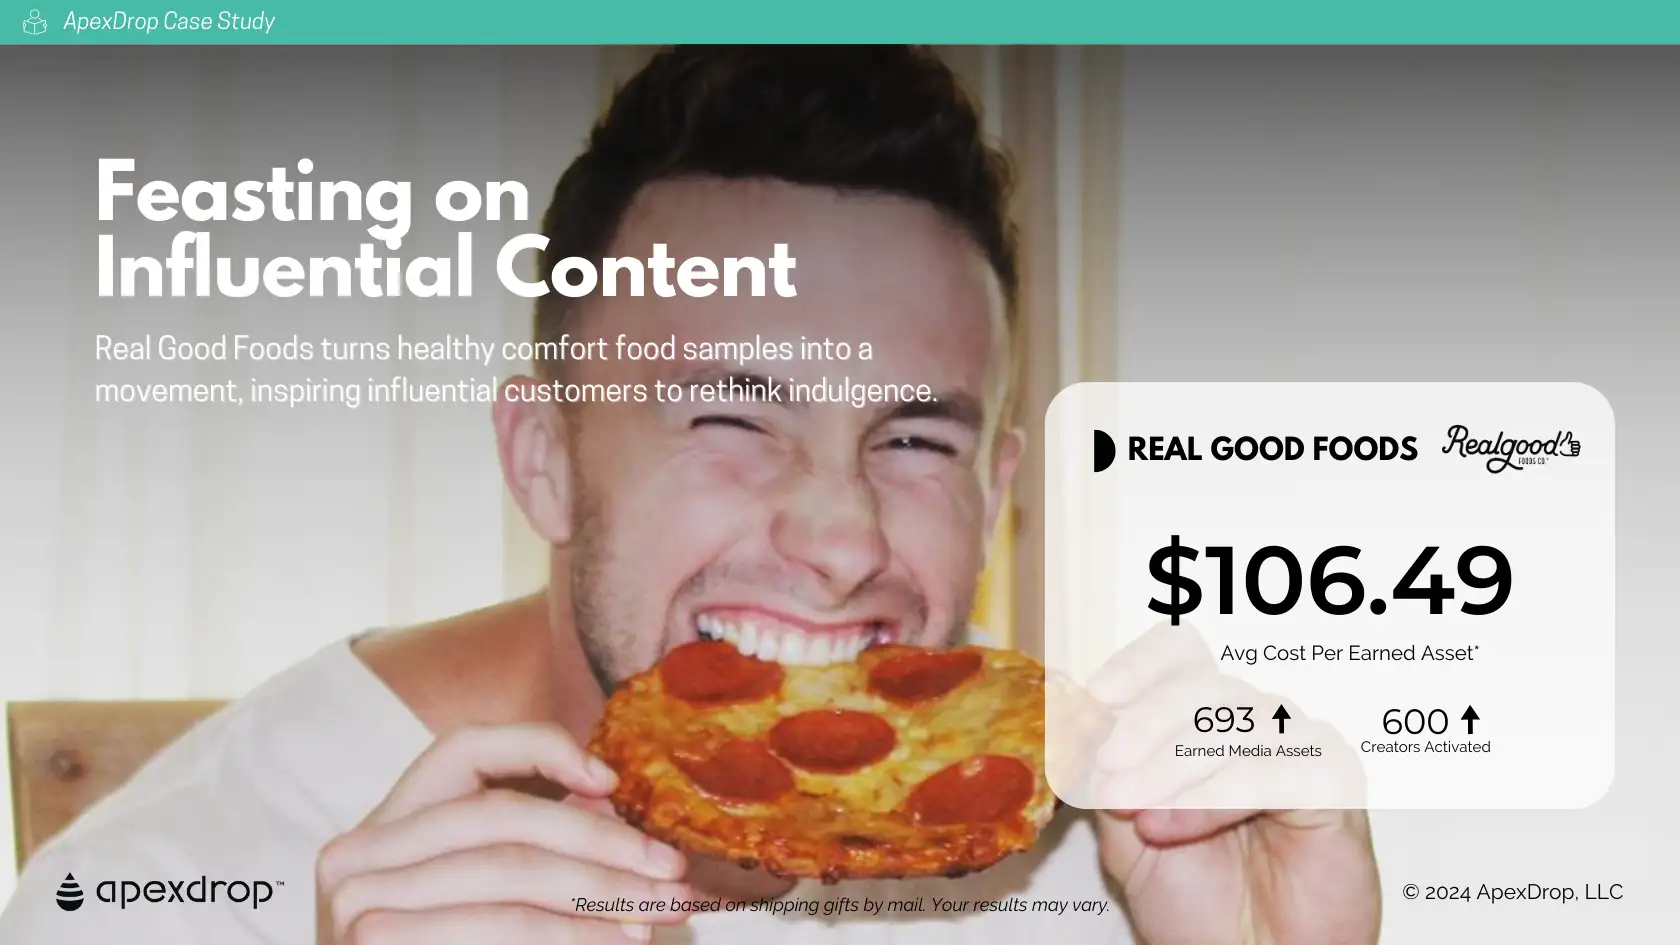 Feasting on Influential Content - Real Good Foods turns healthy comfort food samples into a movement, inspiring influential customers to rethink indulgence.